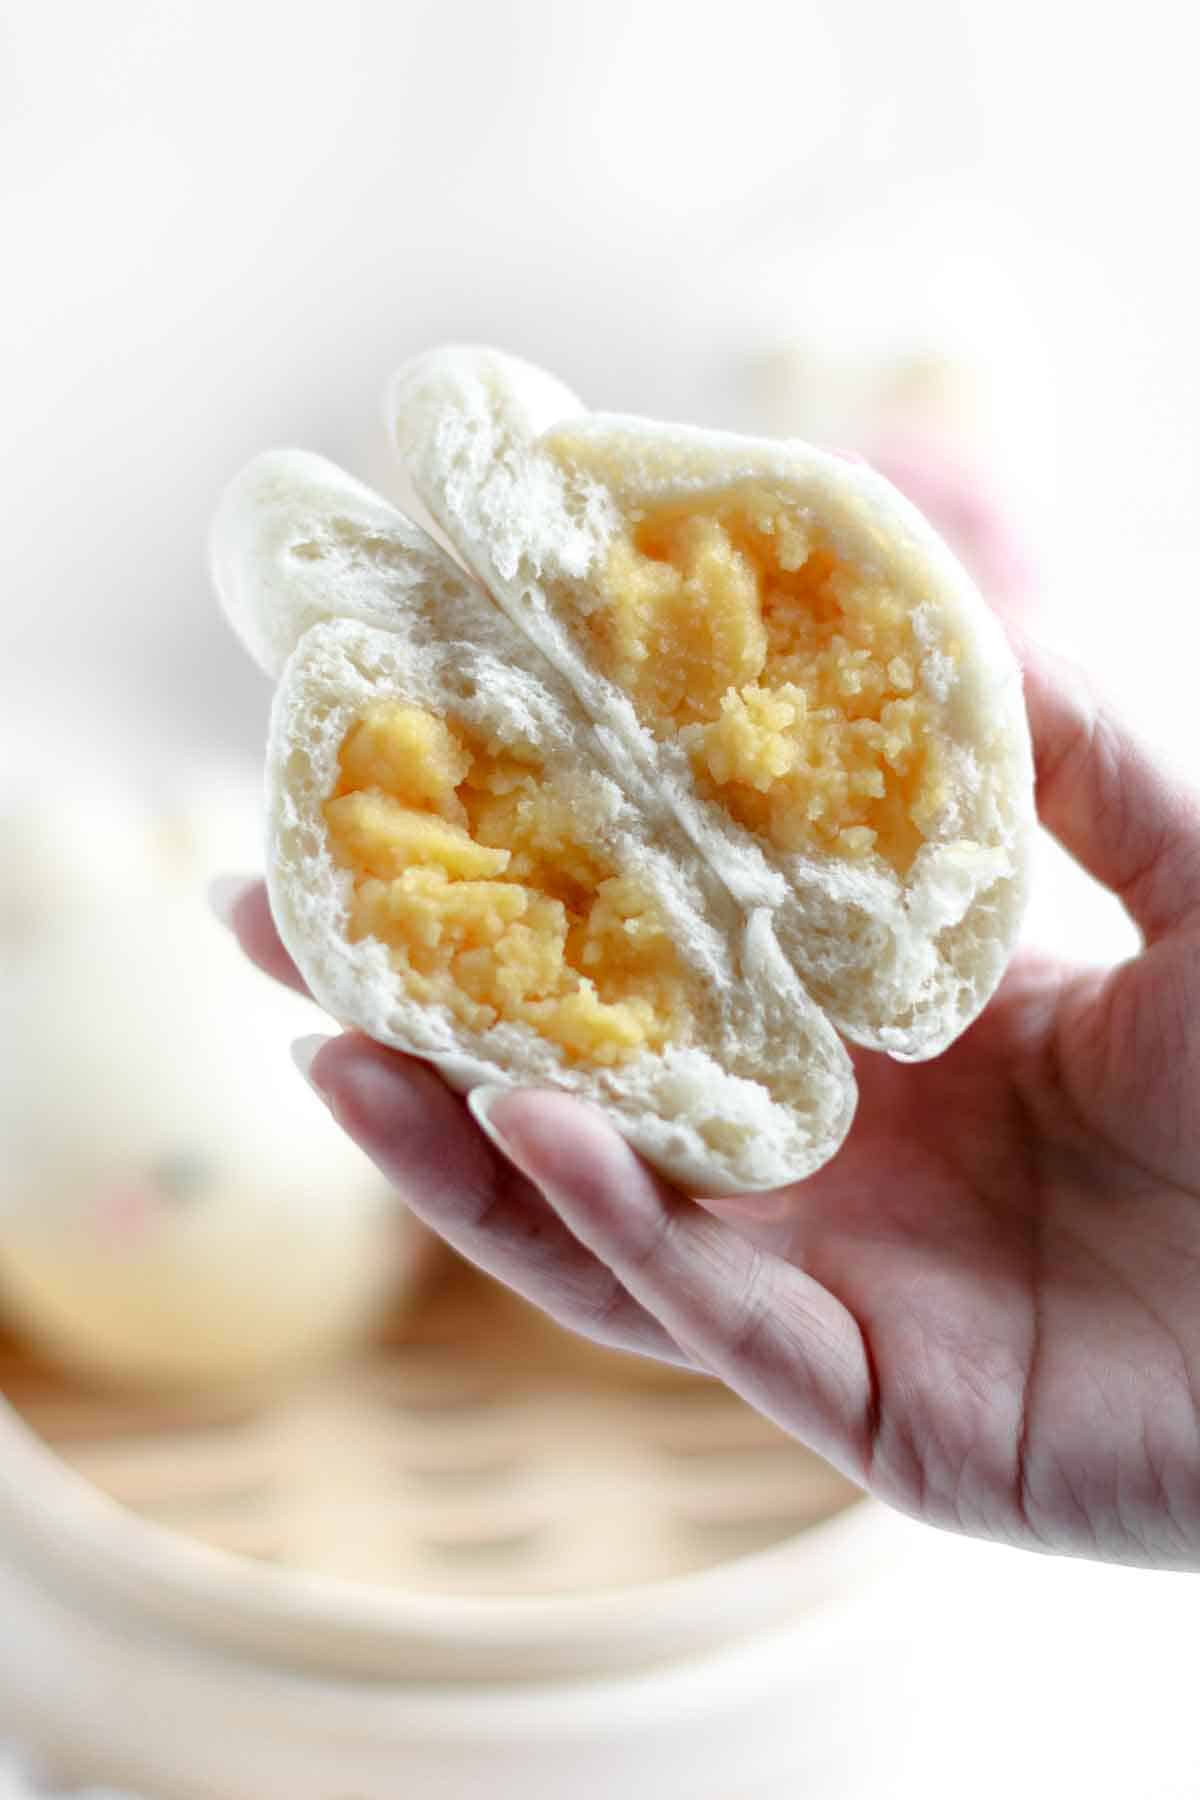 Chinese steamed buns filled with custard